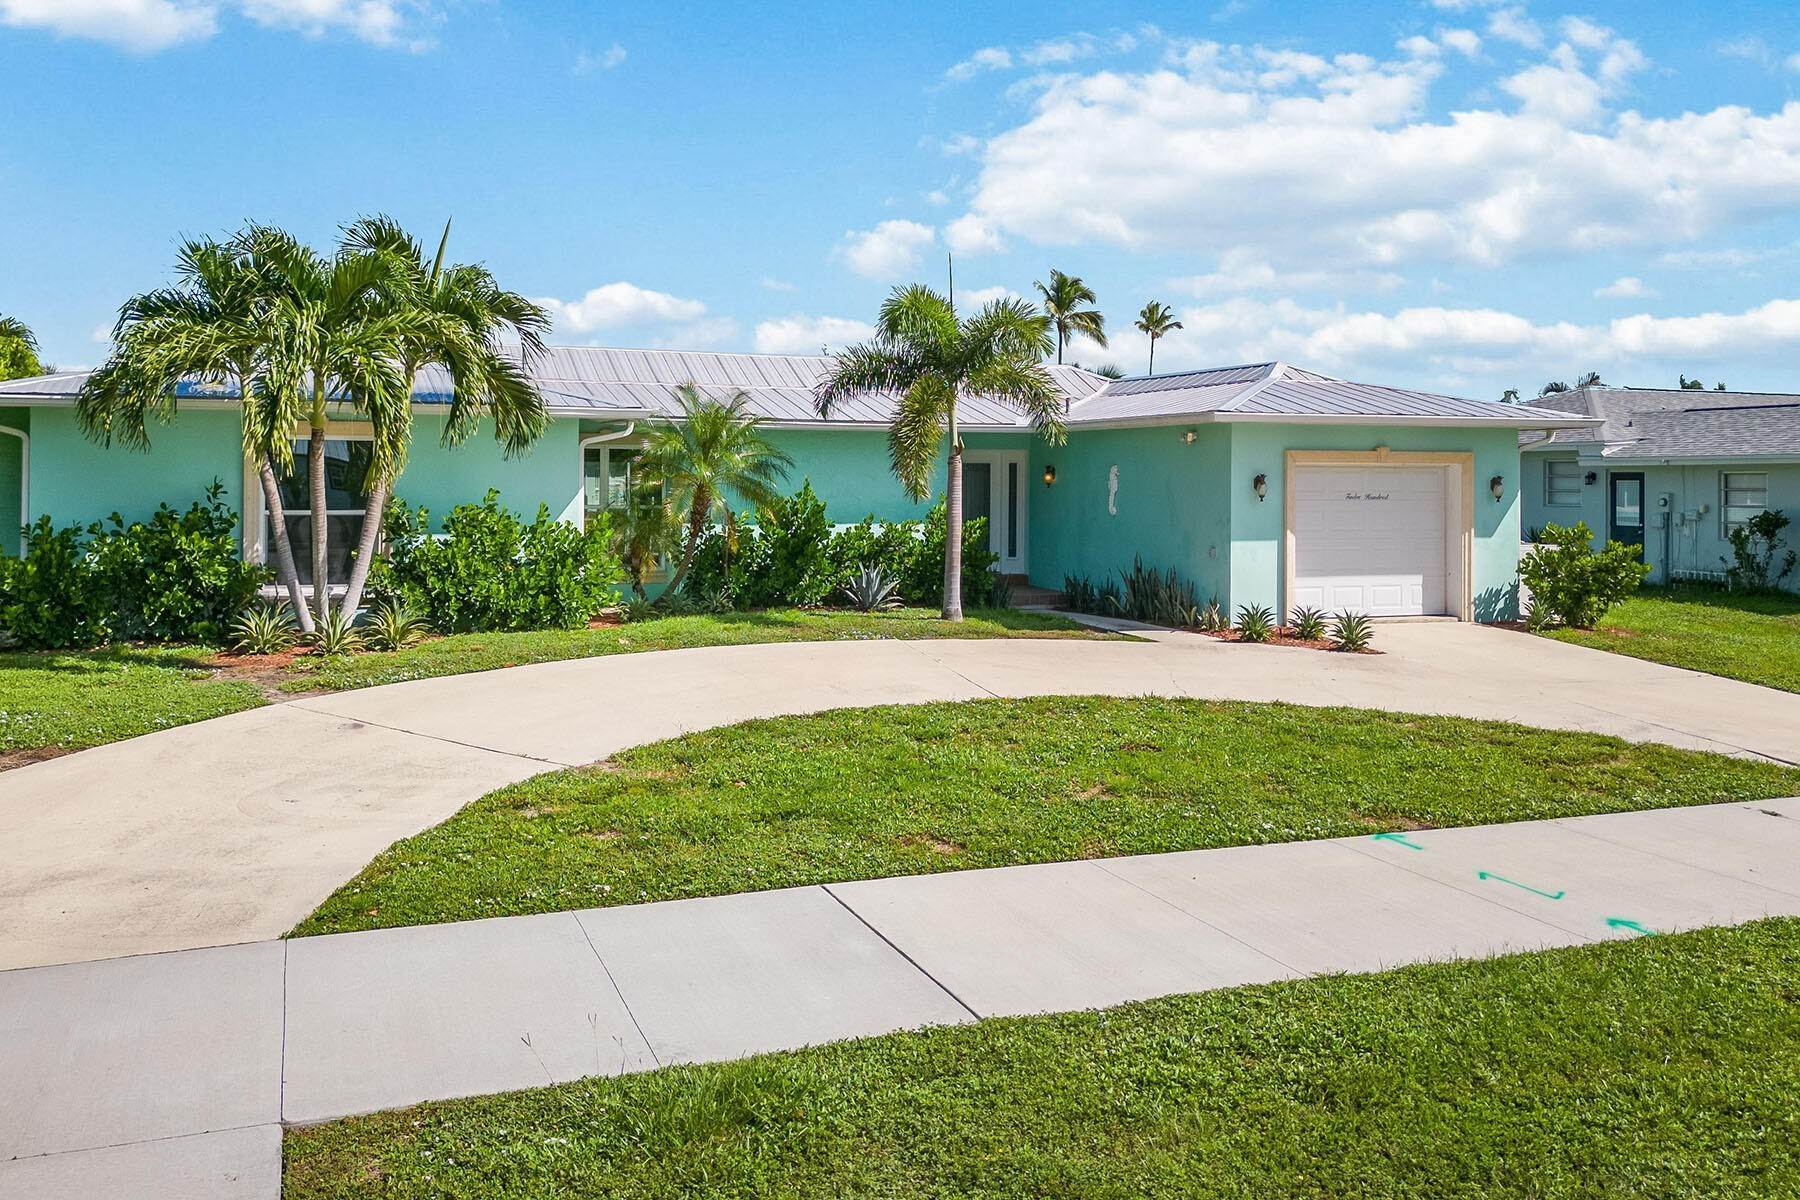 41. Single Family for Sale at Marco Island, FL 34145